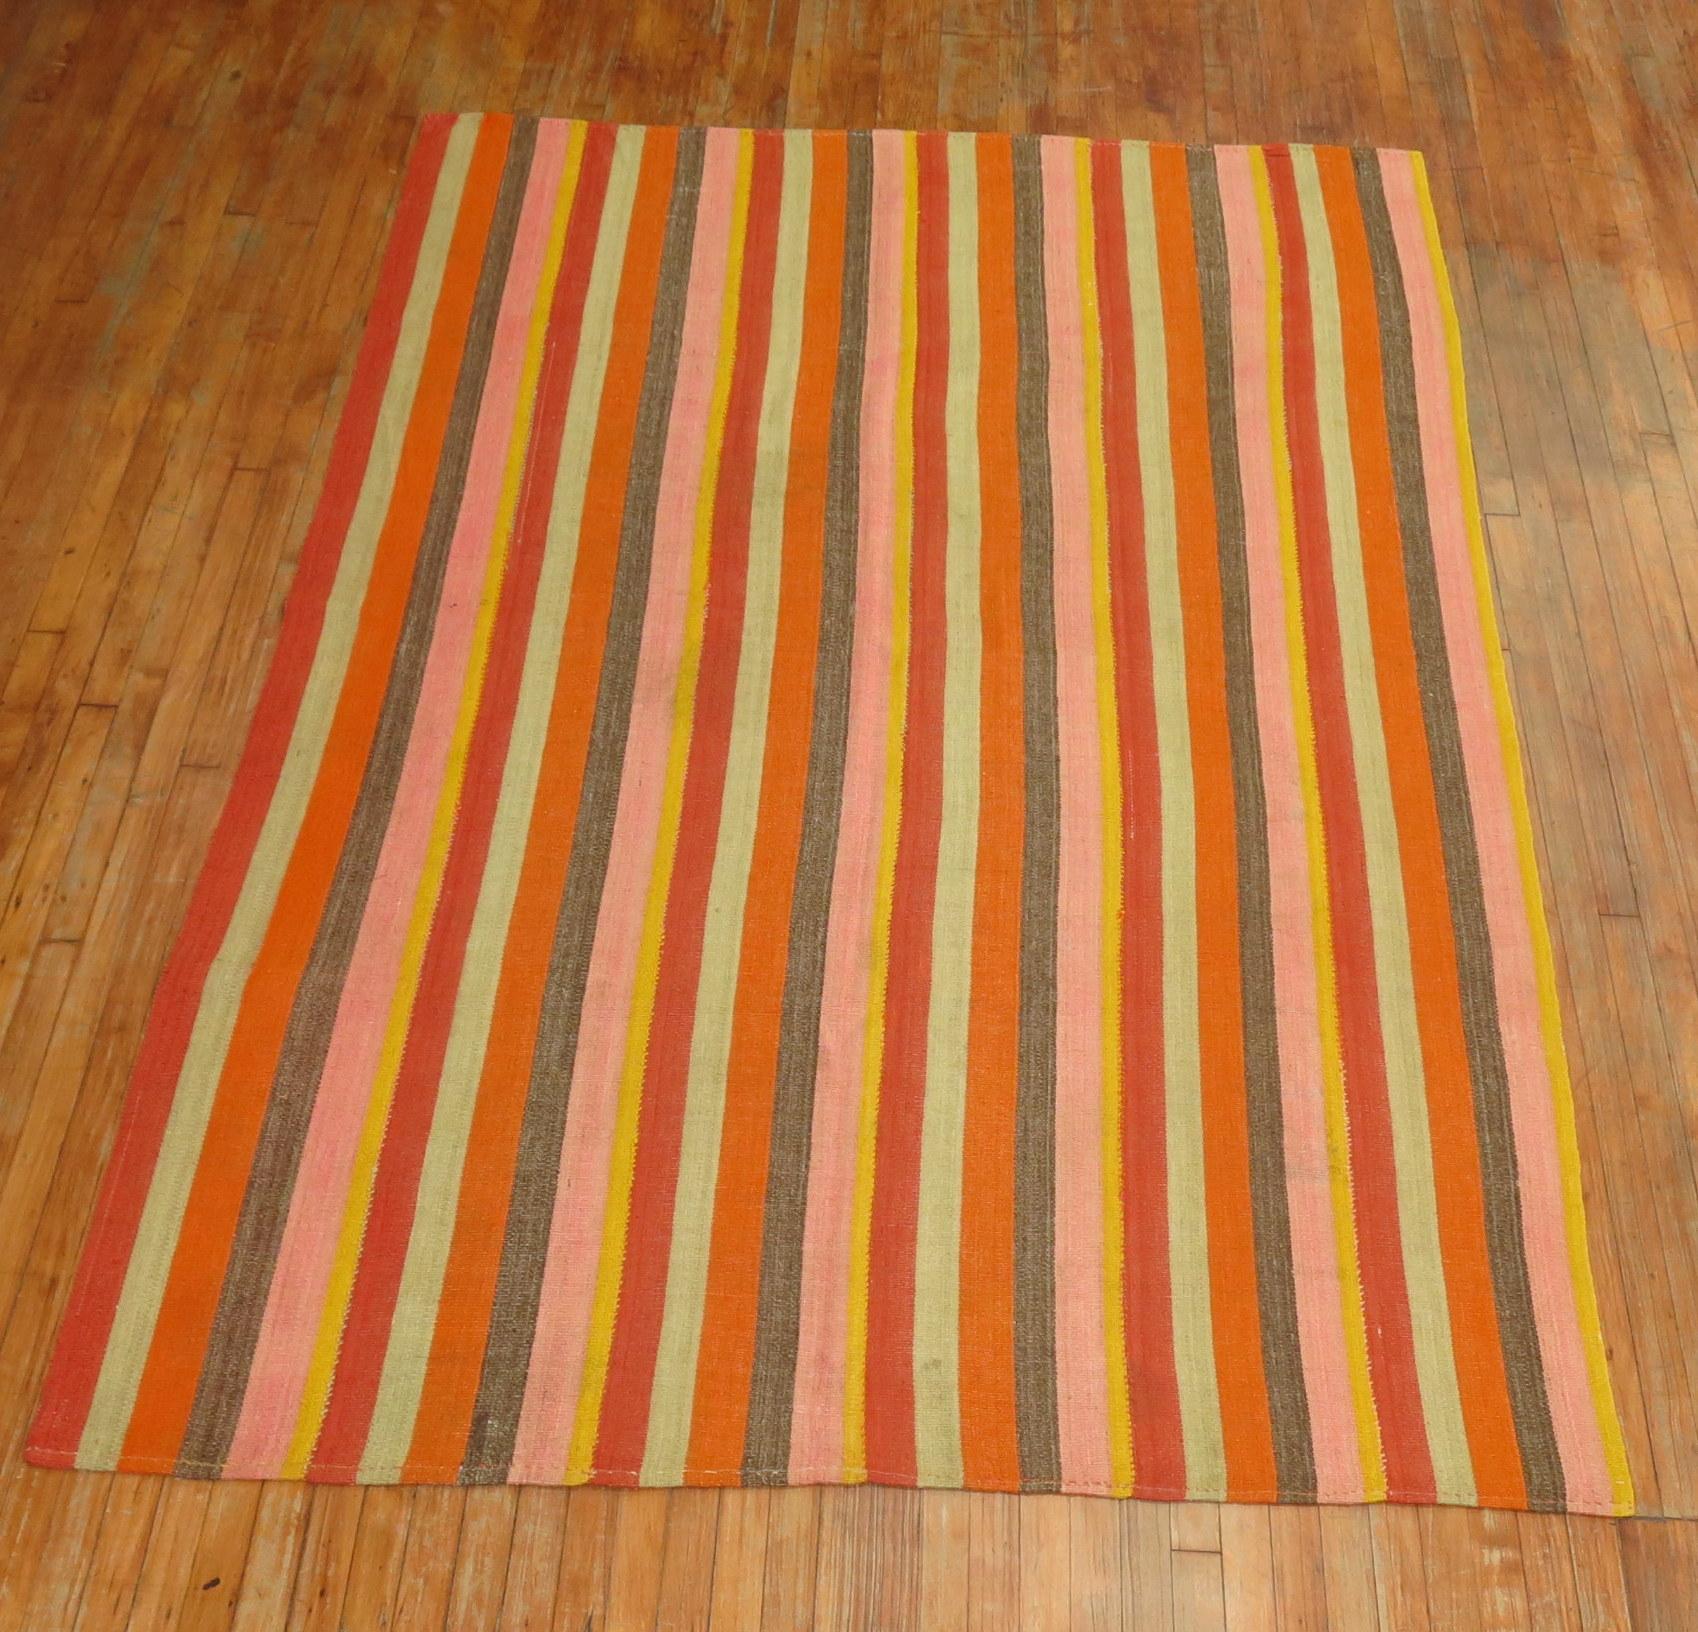 20th century Turkish Kilim with a striped motif in orange, pinks, reds, yellows, teal and brown.